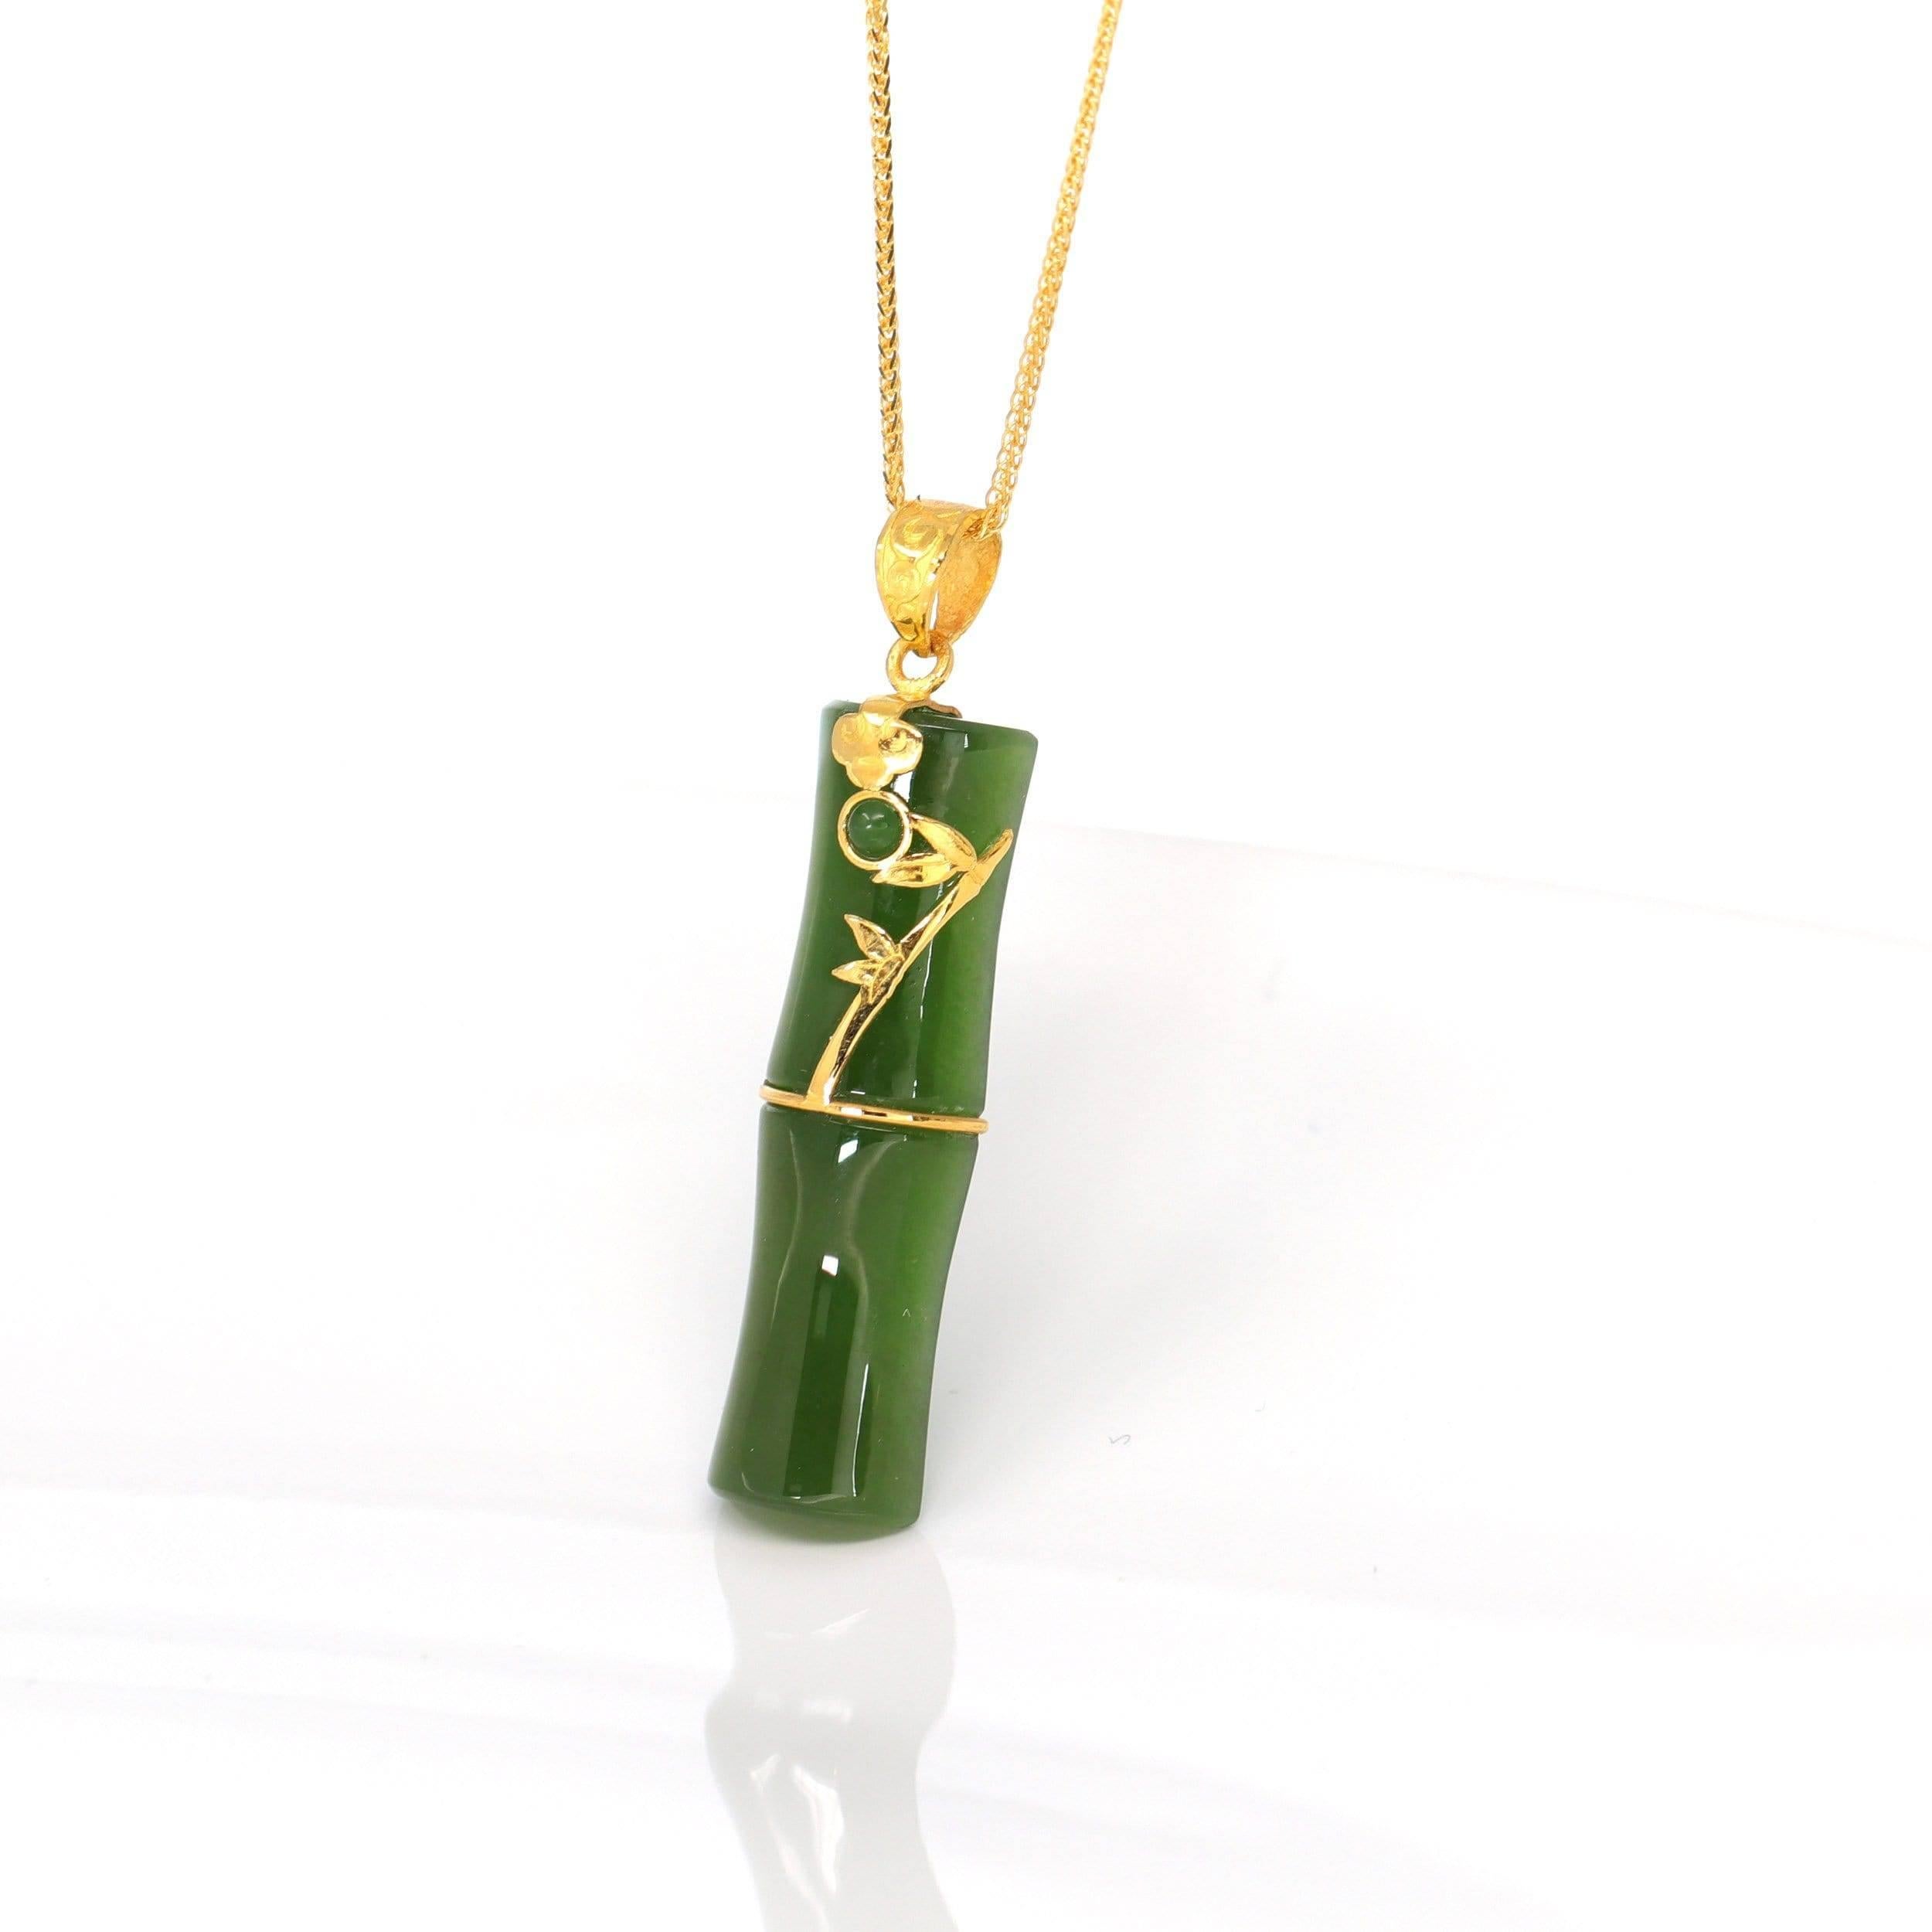 * DETAILS--- 24k Yellow Gold Genuine Nephrite Green Jade Bamboo Pendant Necklace. This pendant is made with high-quality genuine green jade, The green jade texture is so smooth and translucent. It's perfect without flaws. Excellent carving work is